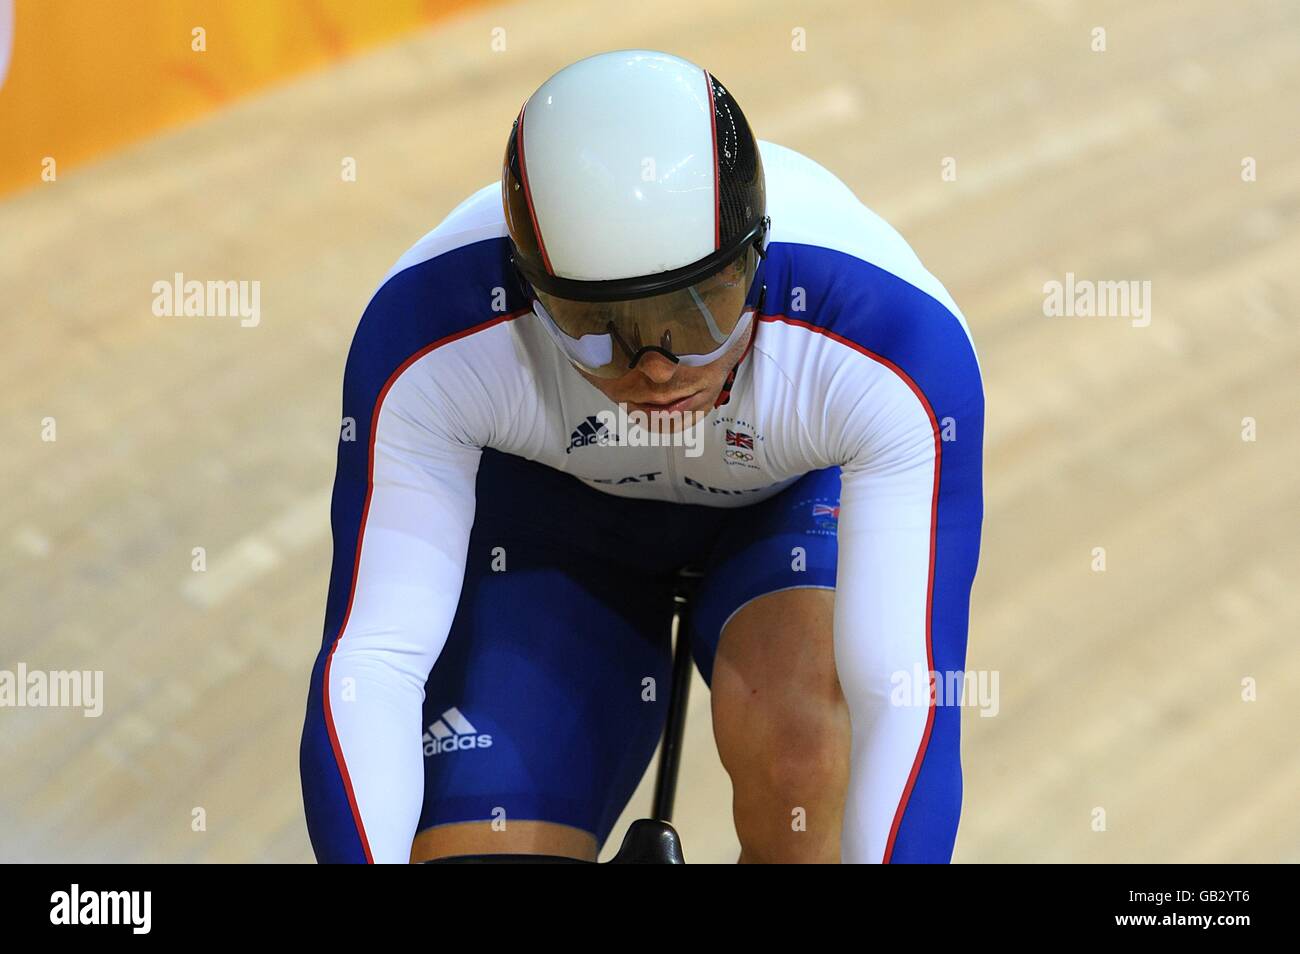 Great Britain's Chris Hoy during the Men's Sprint at the Track Cycling Course at the Laoshan Velodrome during the 2008 Beijing Olympic Games in China. Stock Photo